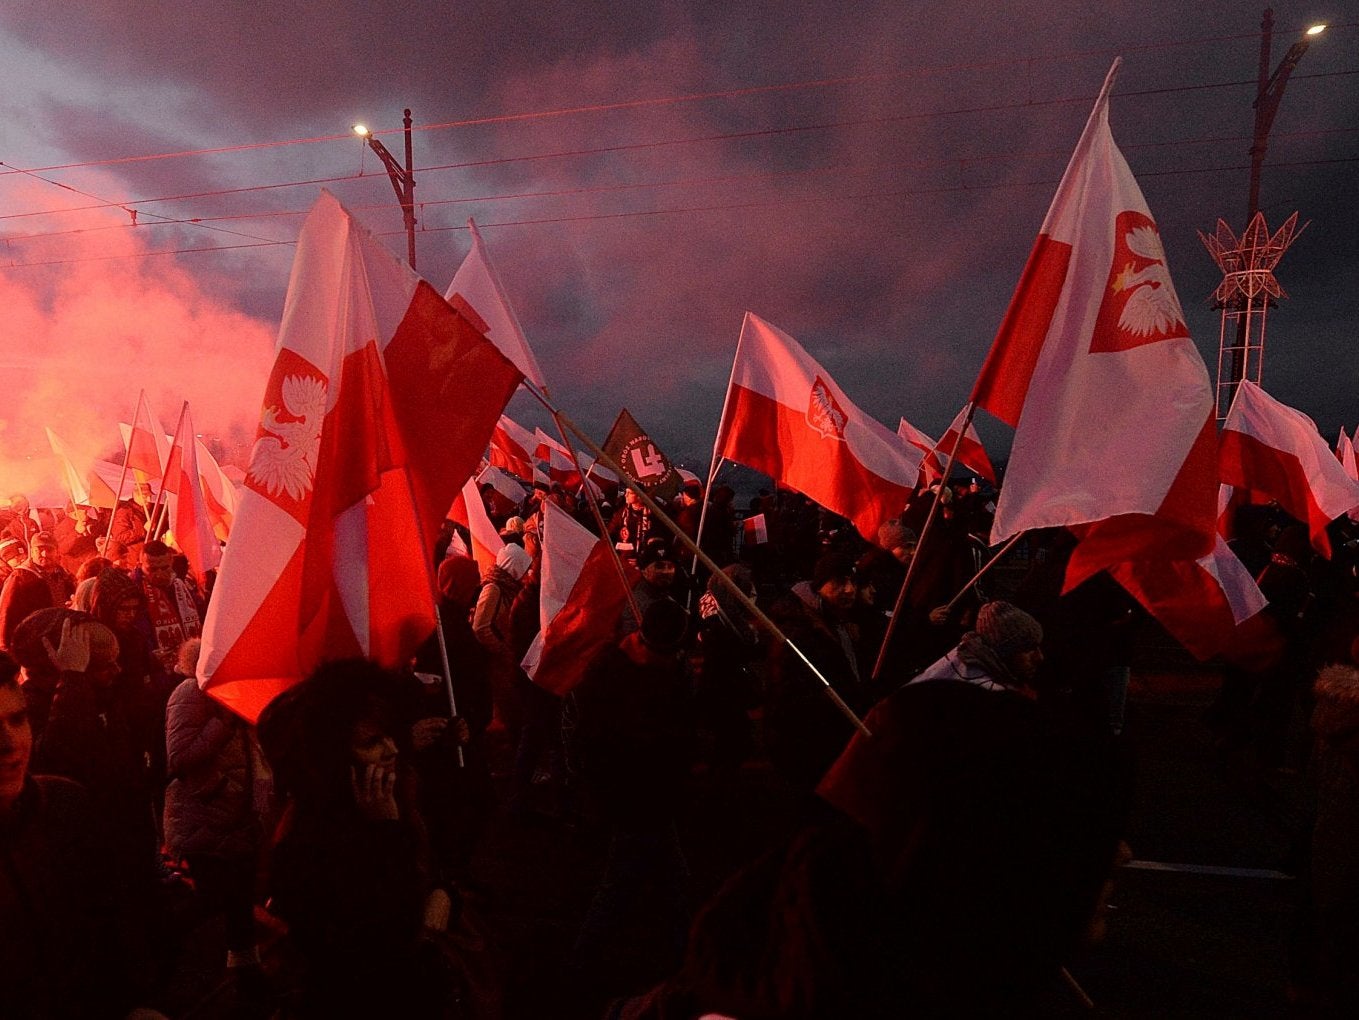 Demonstrators burn flares and wave Polish flags during the annual march to commemorate the country's self-determination